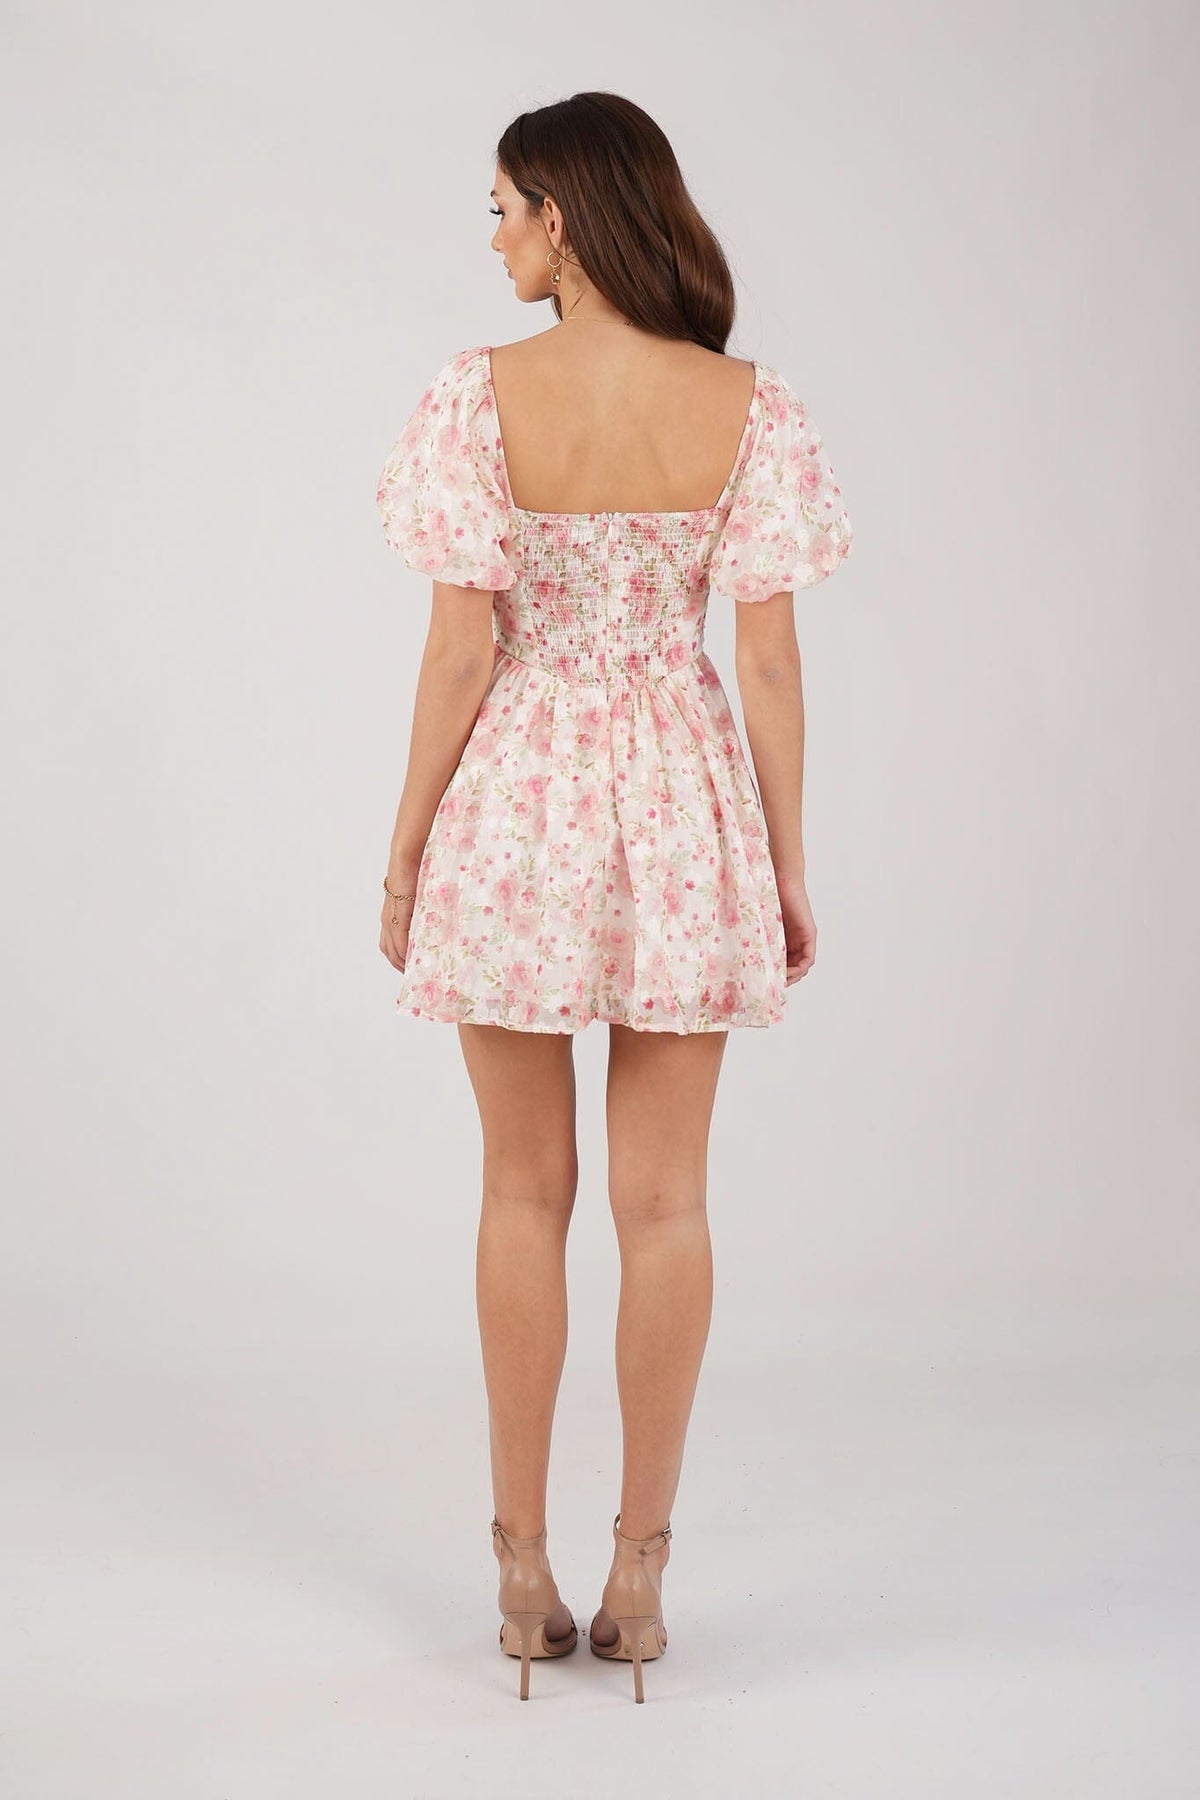 Shirred Stretch Back Design of Pink Floral Mini Dress with Sweetheart Neckline and Puff Sleeves